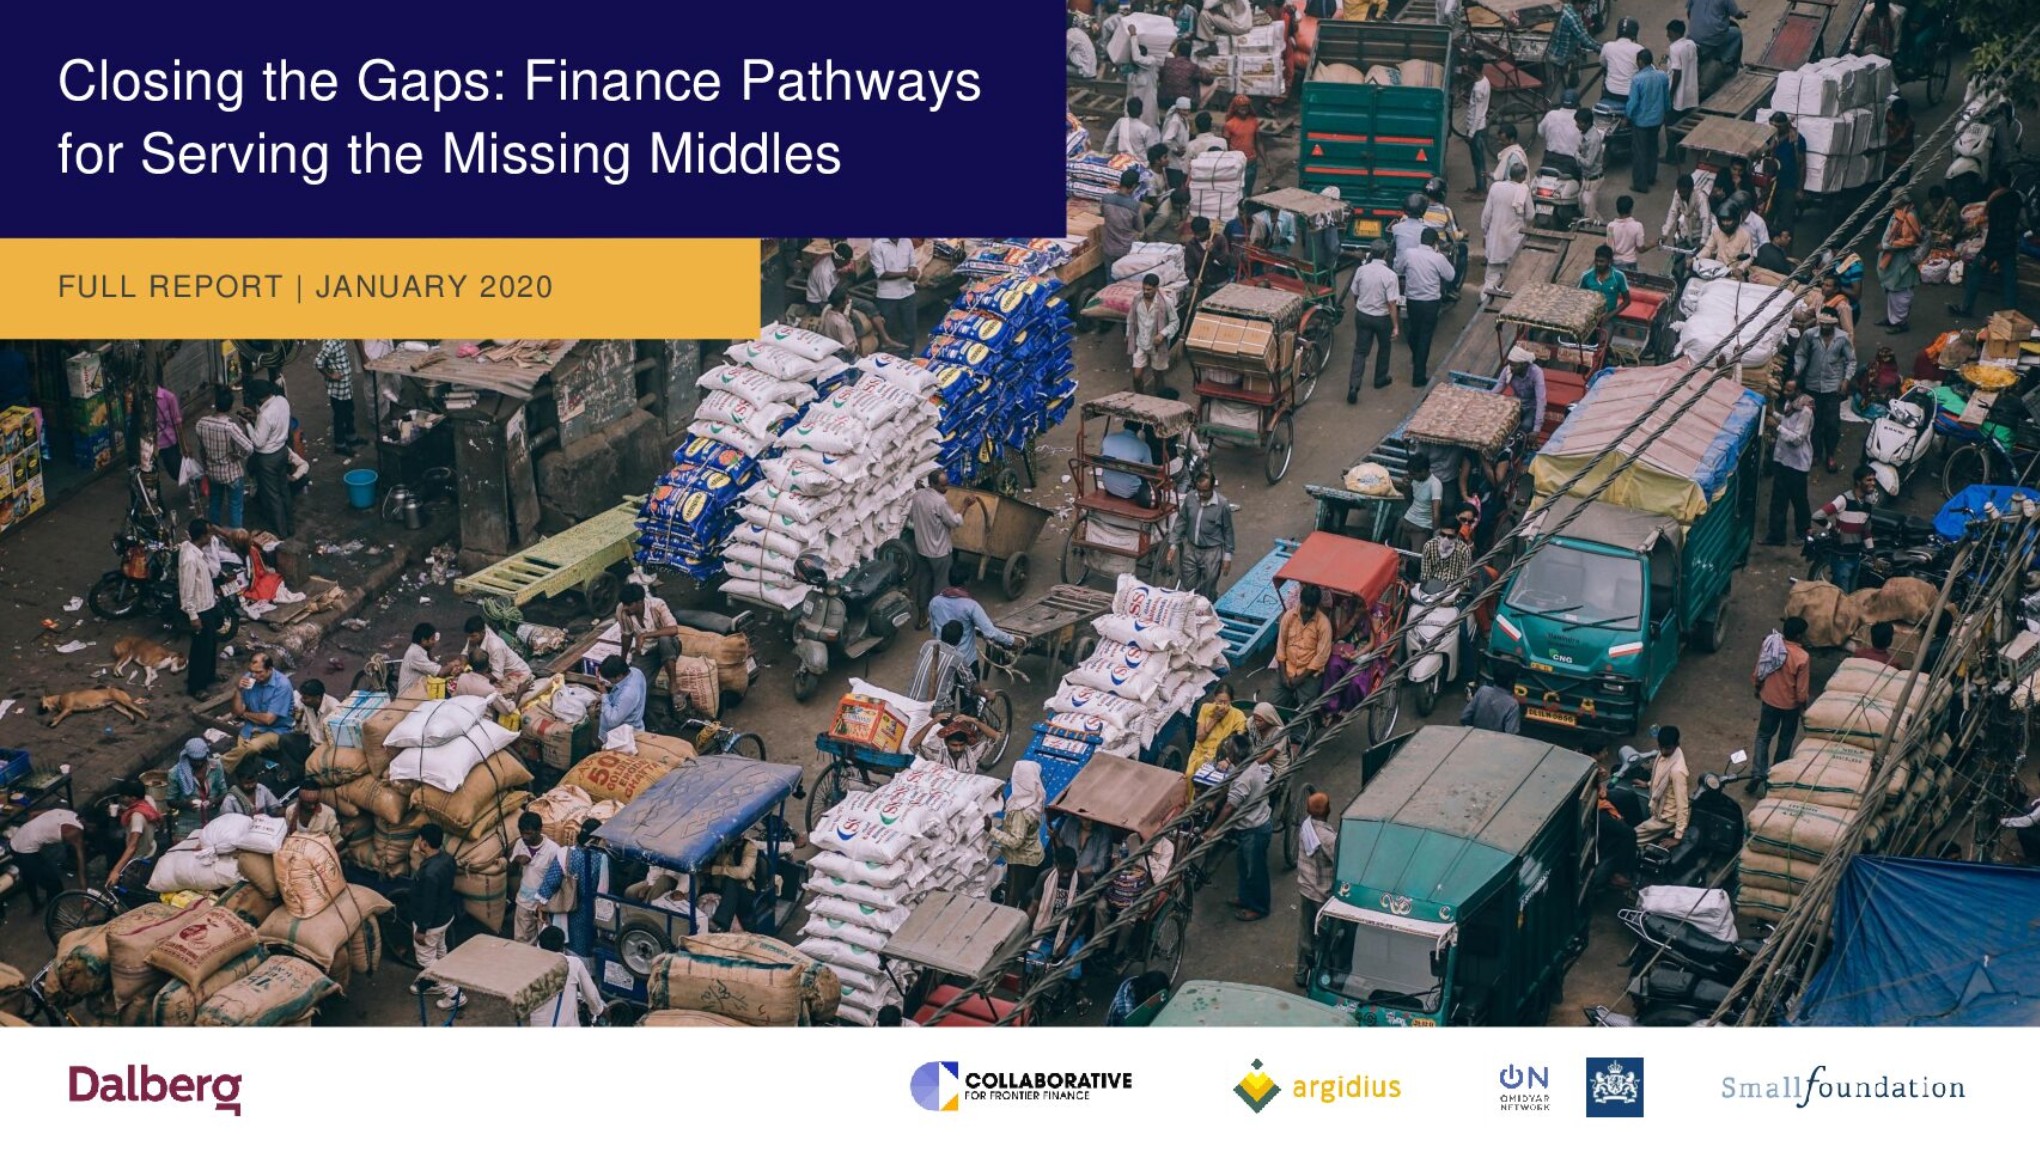 Closing the Gaps_ Finance Pathways for Serving the Missing Middles pdf - Iungo capital downloads